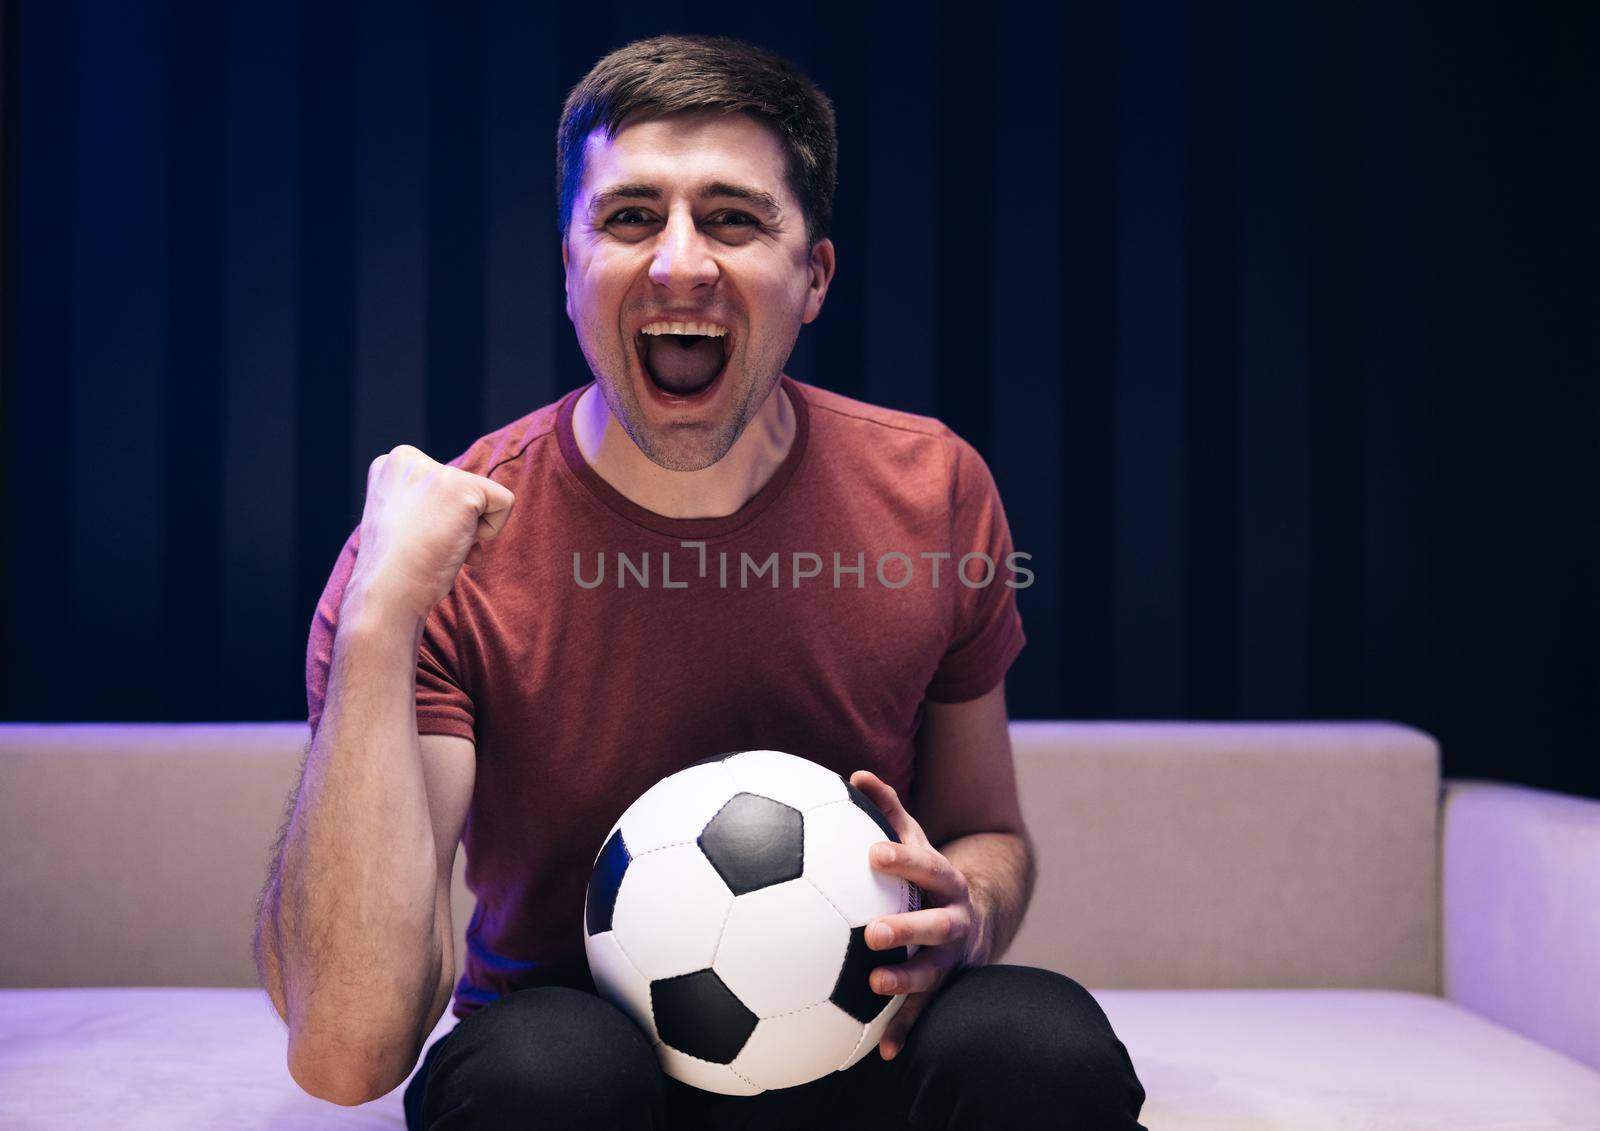 Young fun guy 30s football fan cheer up support favorite team hold soccer in red t-shirt in dark living room. People emotions sport leisure lifestyle concept by uflypro